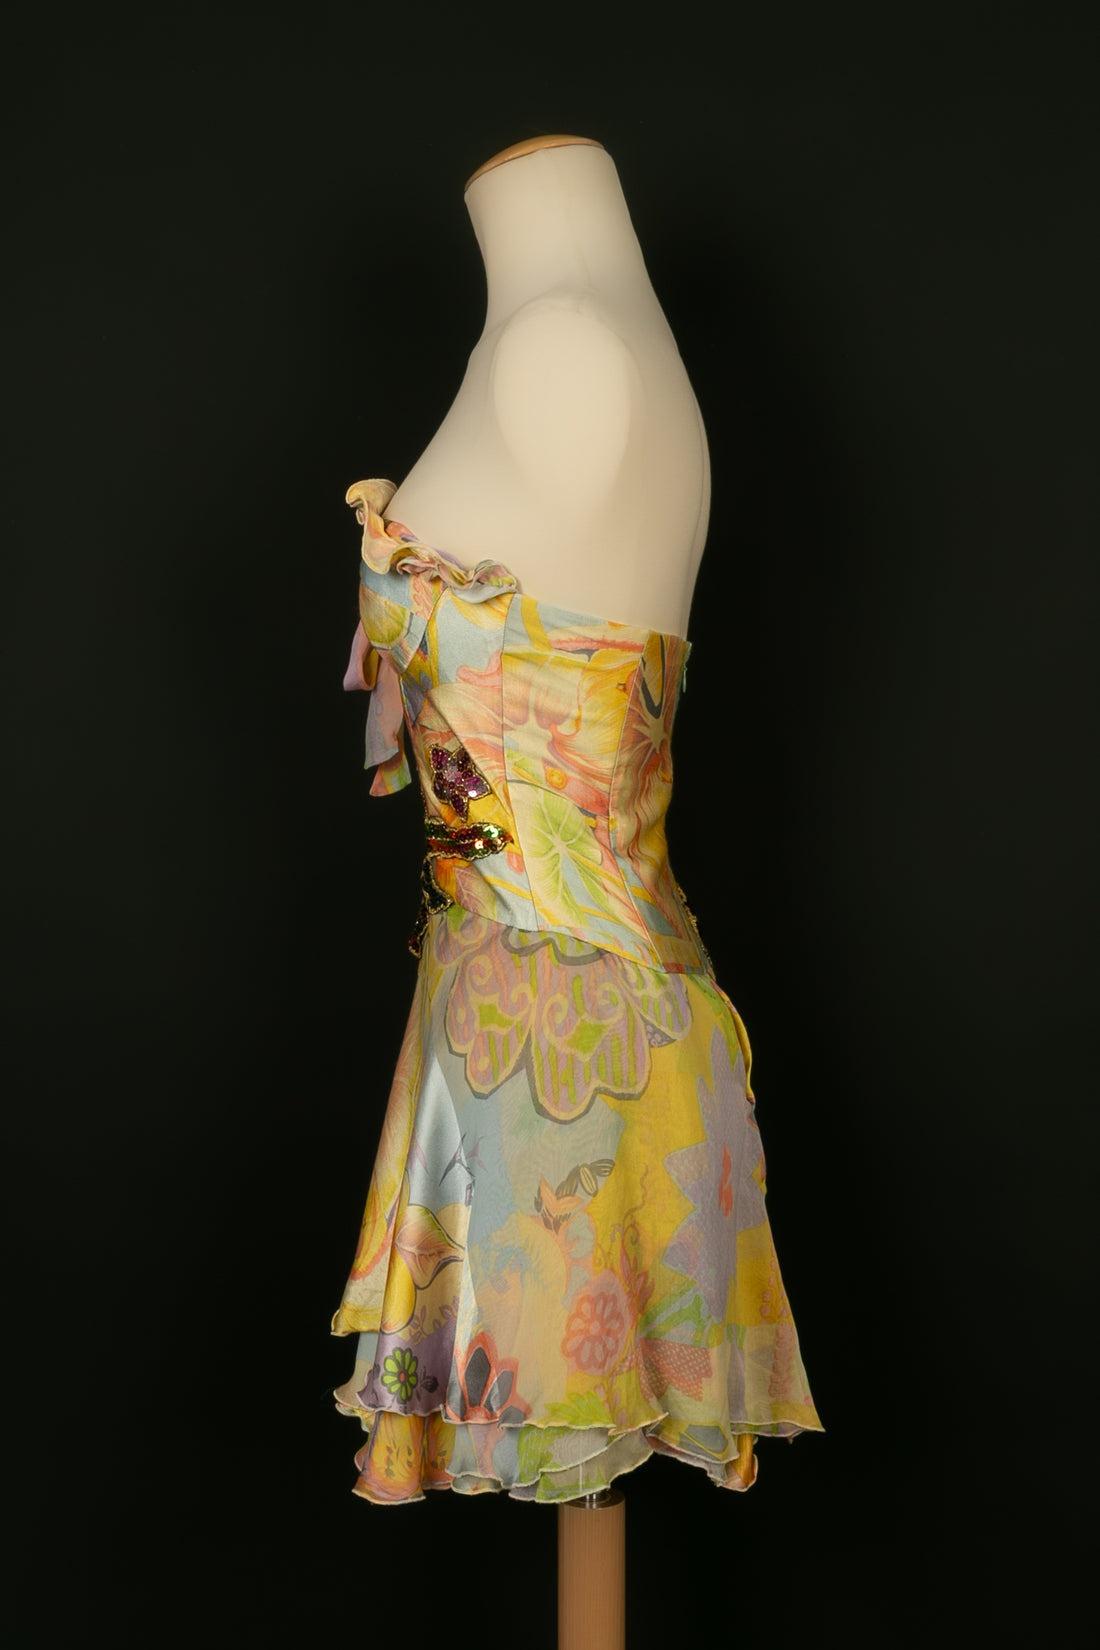 Christian Lacroix - (Made in France) Short dress in silk embroidered with lurex yarns and multicolored sequins. Size  36FR.

Additional information:
Condition: Very good condition
Dimensions: Chest: 36 cm - Waist: 34 cm - Length: 62 cm
Period: 20th